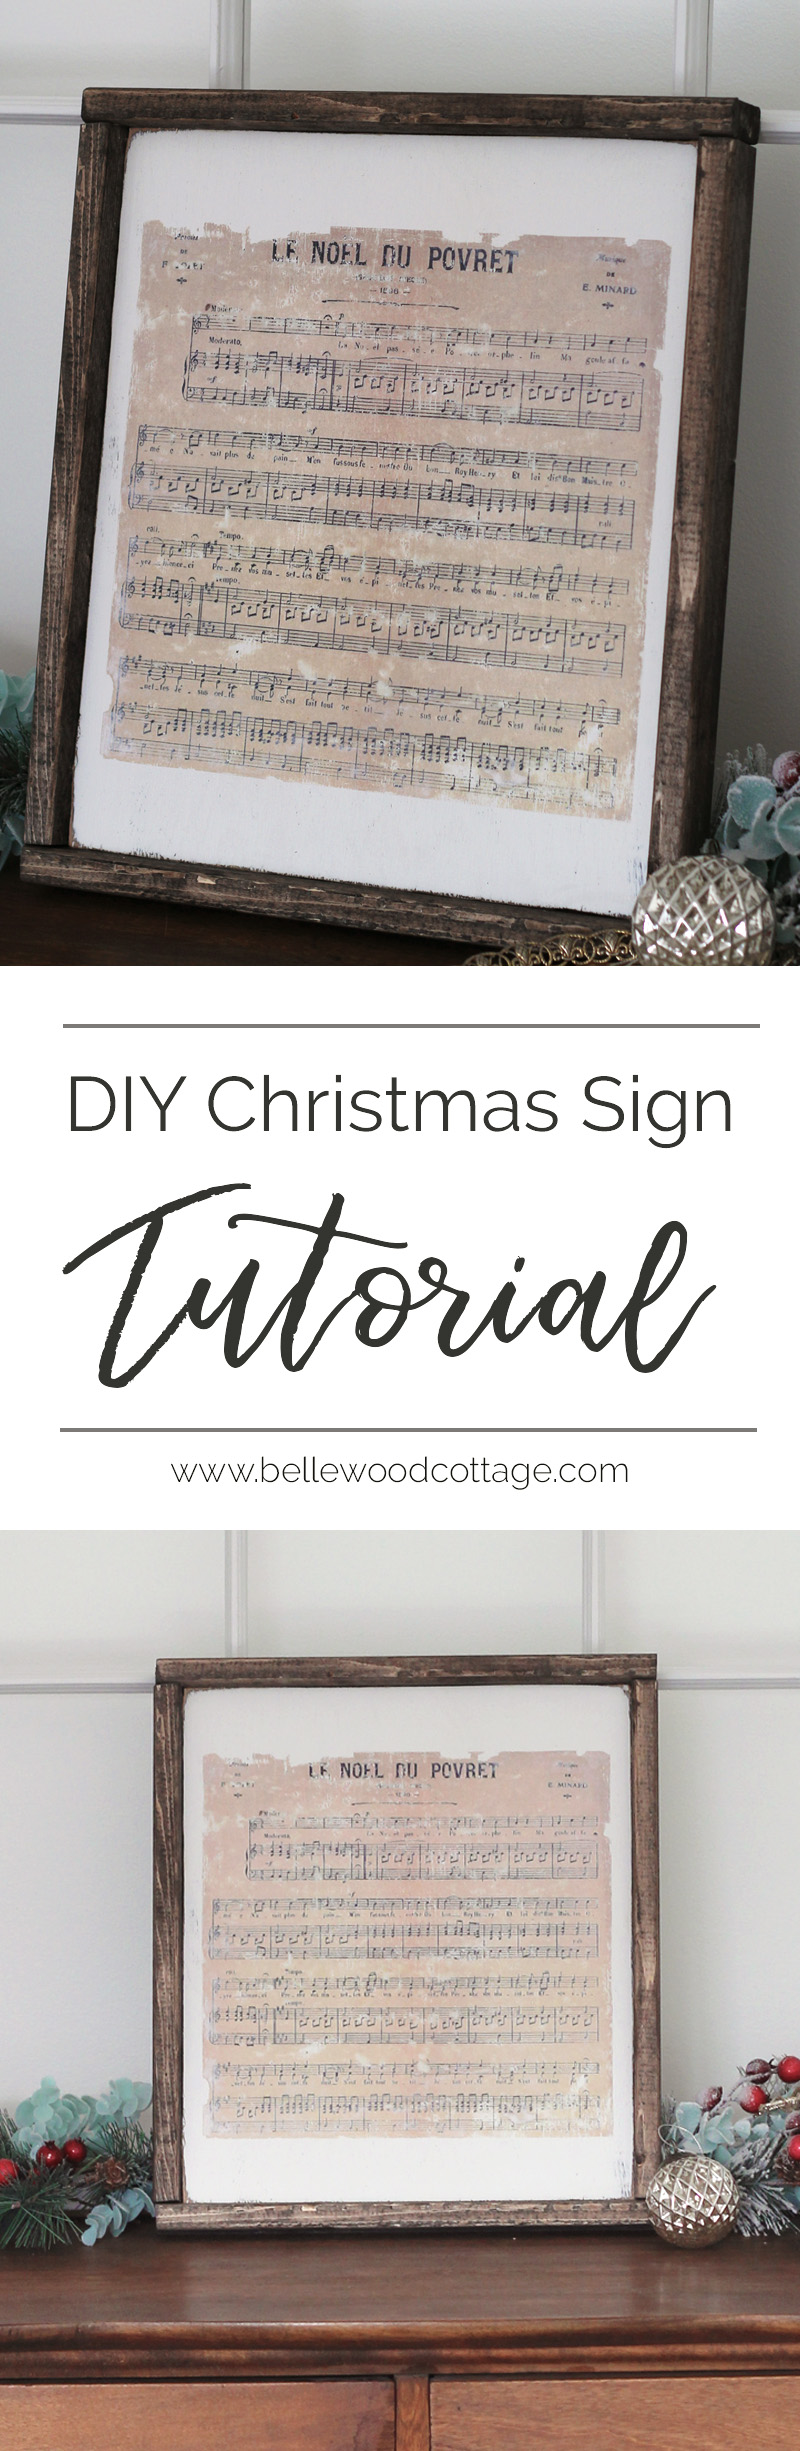 Learn how to make your own rustic DIY Christmas sign with this easy tutorial from Bellewood Cottage! It's a versatile technique that adapts to any decor.